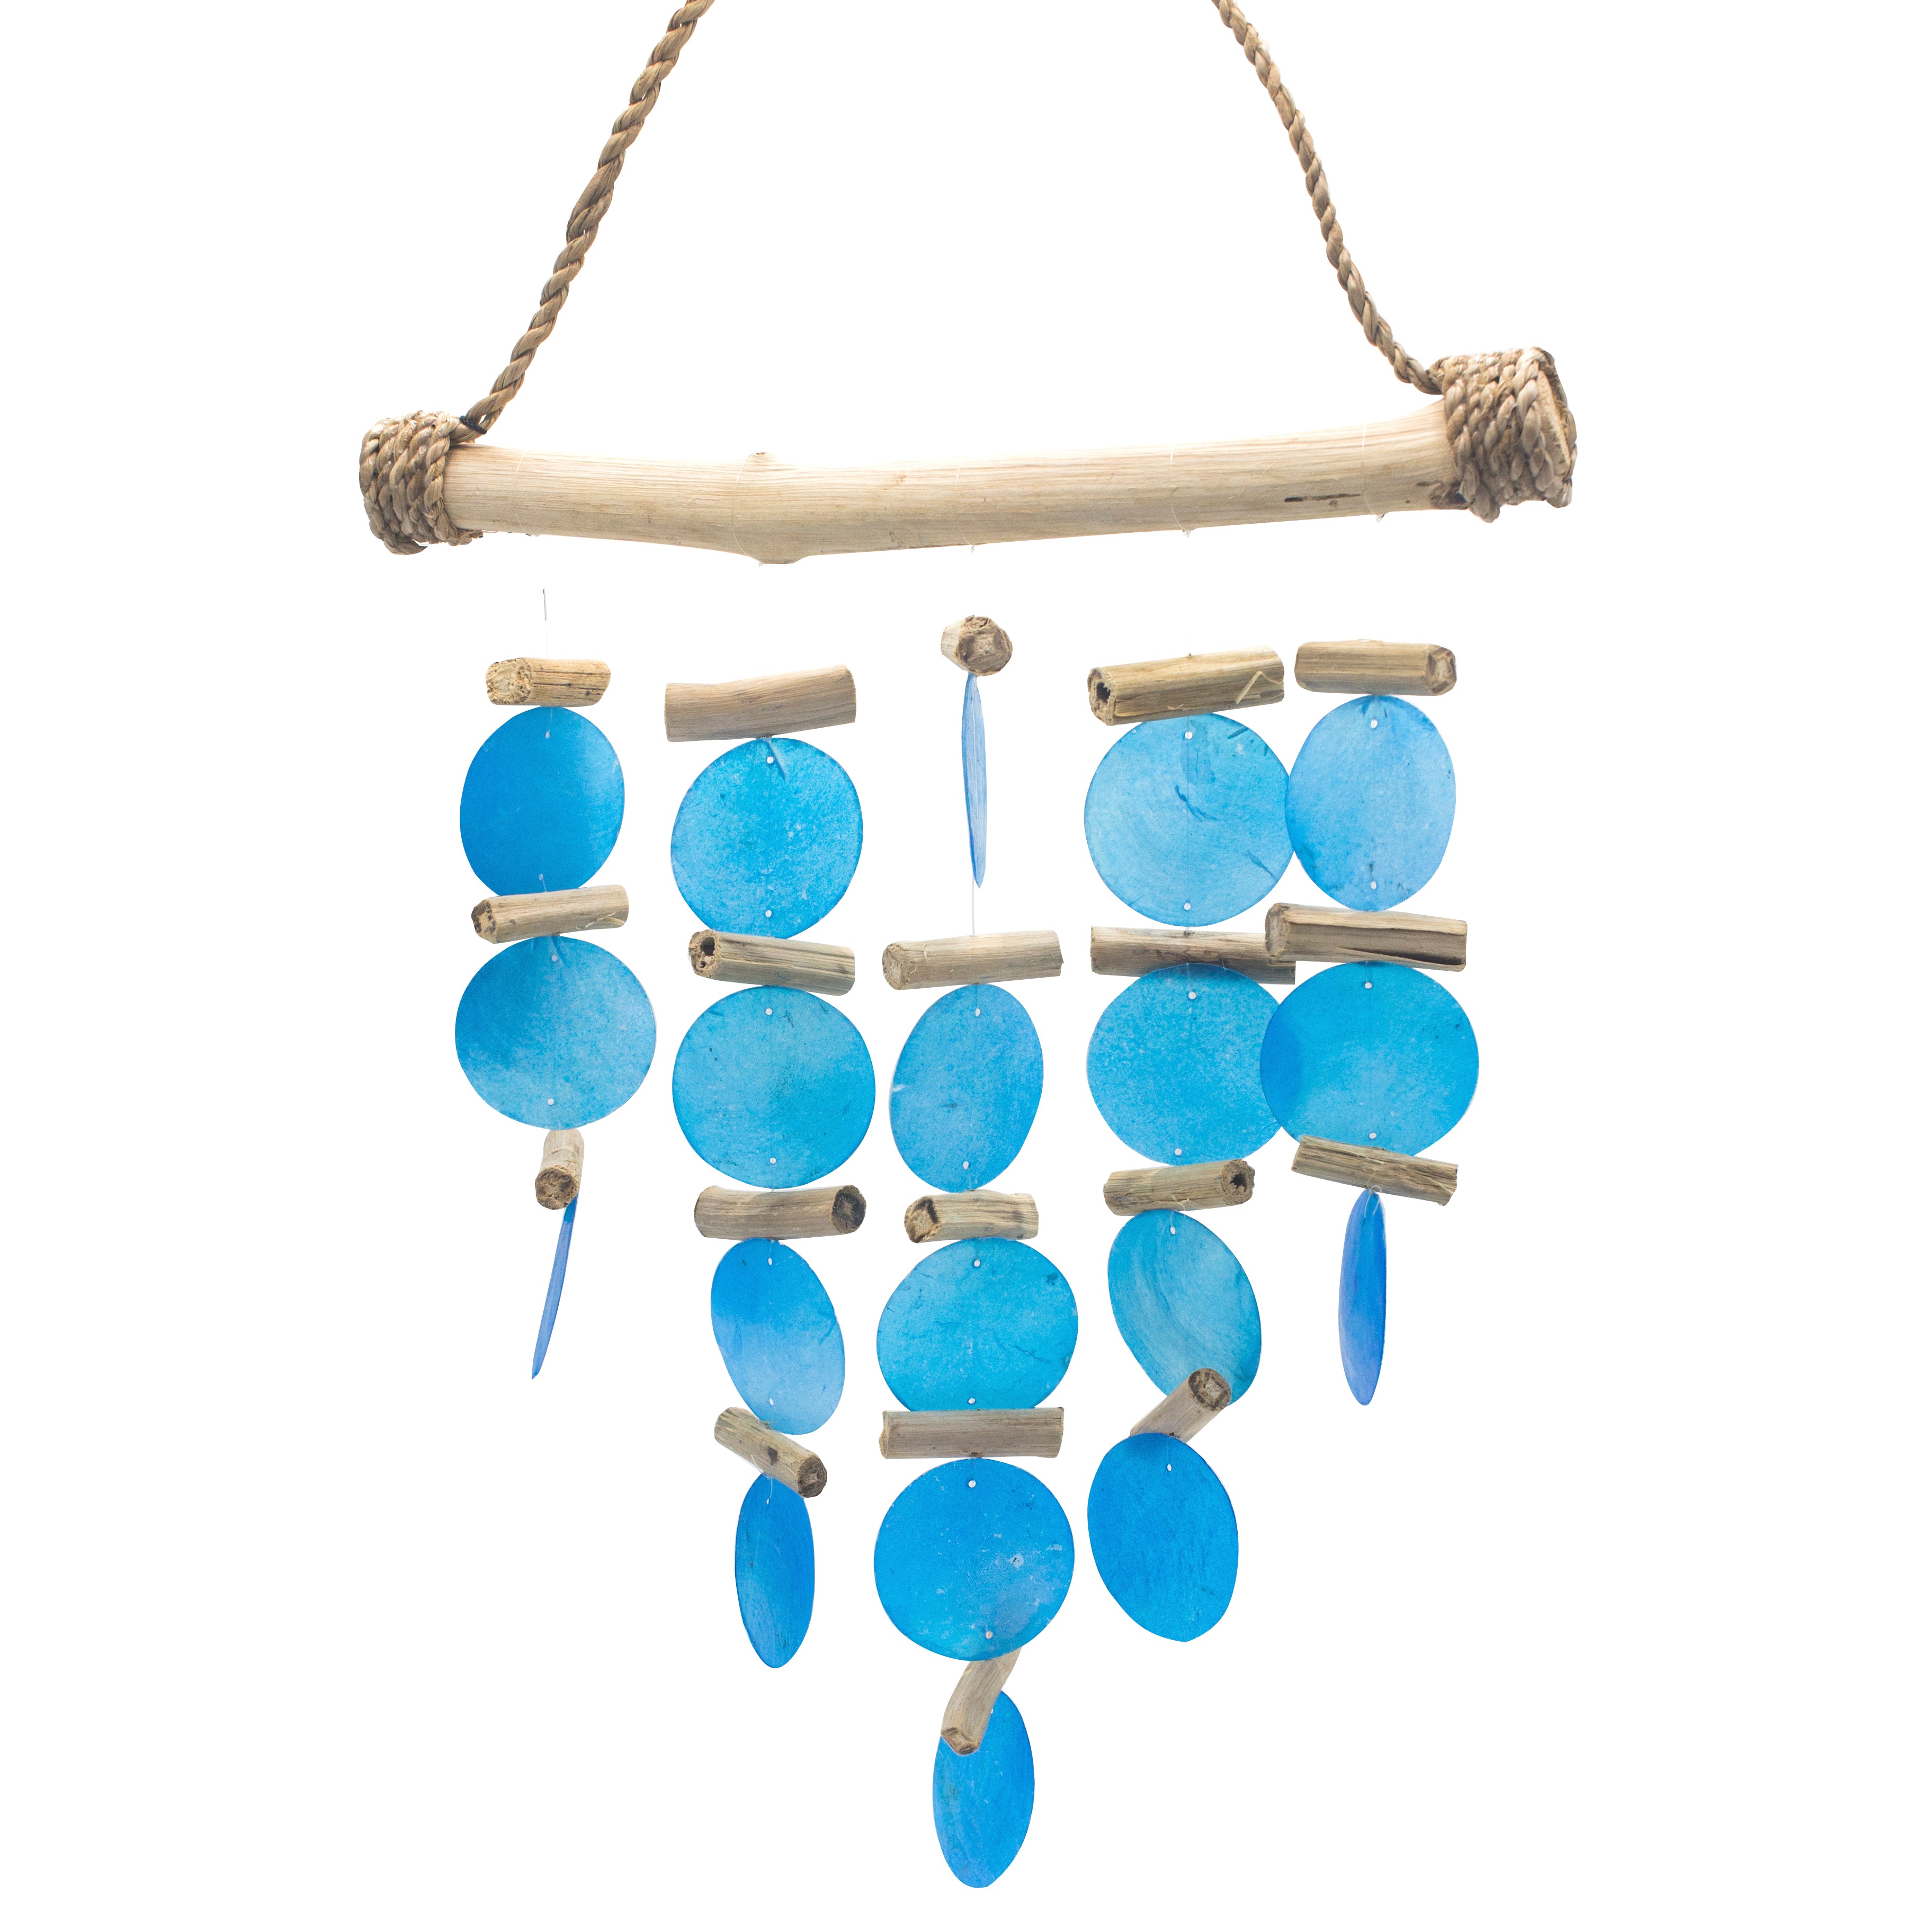 View Blue Driftwood Chime information